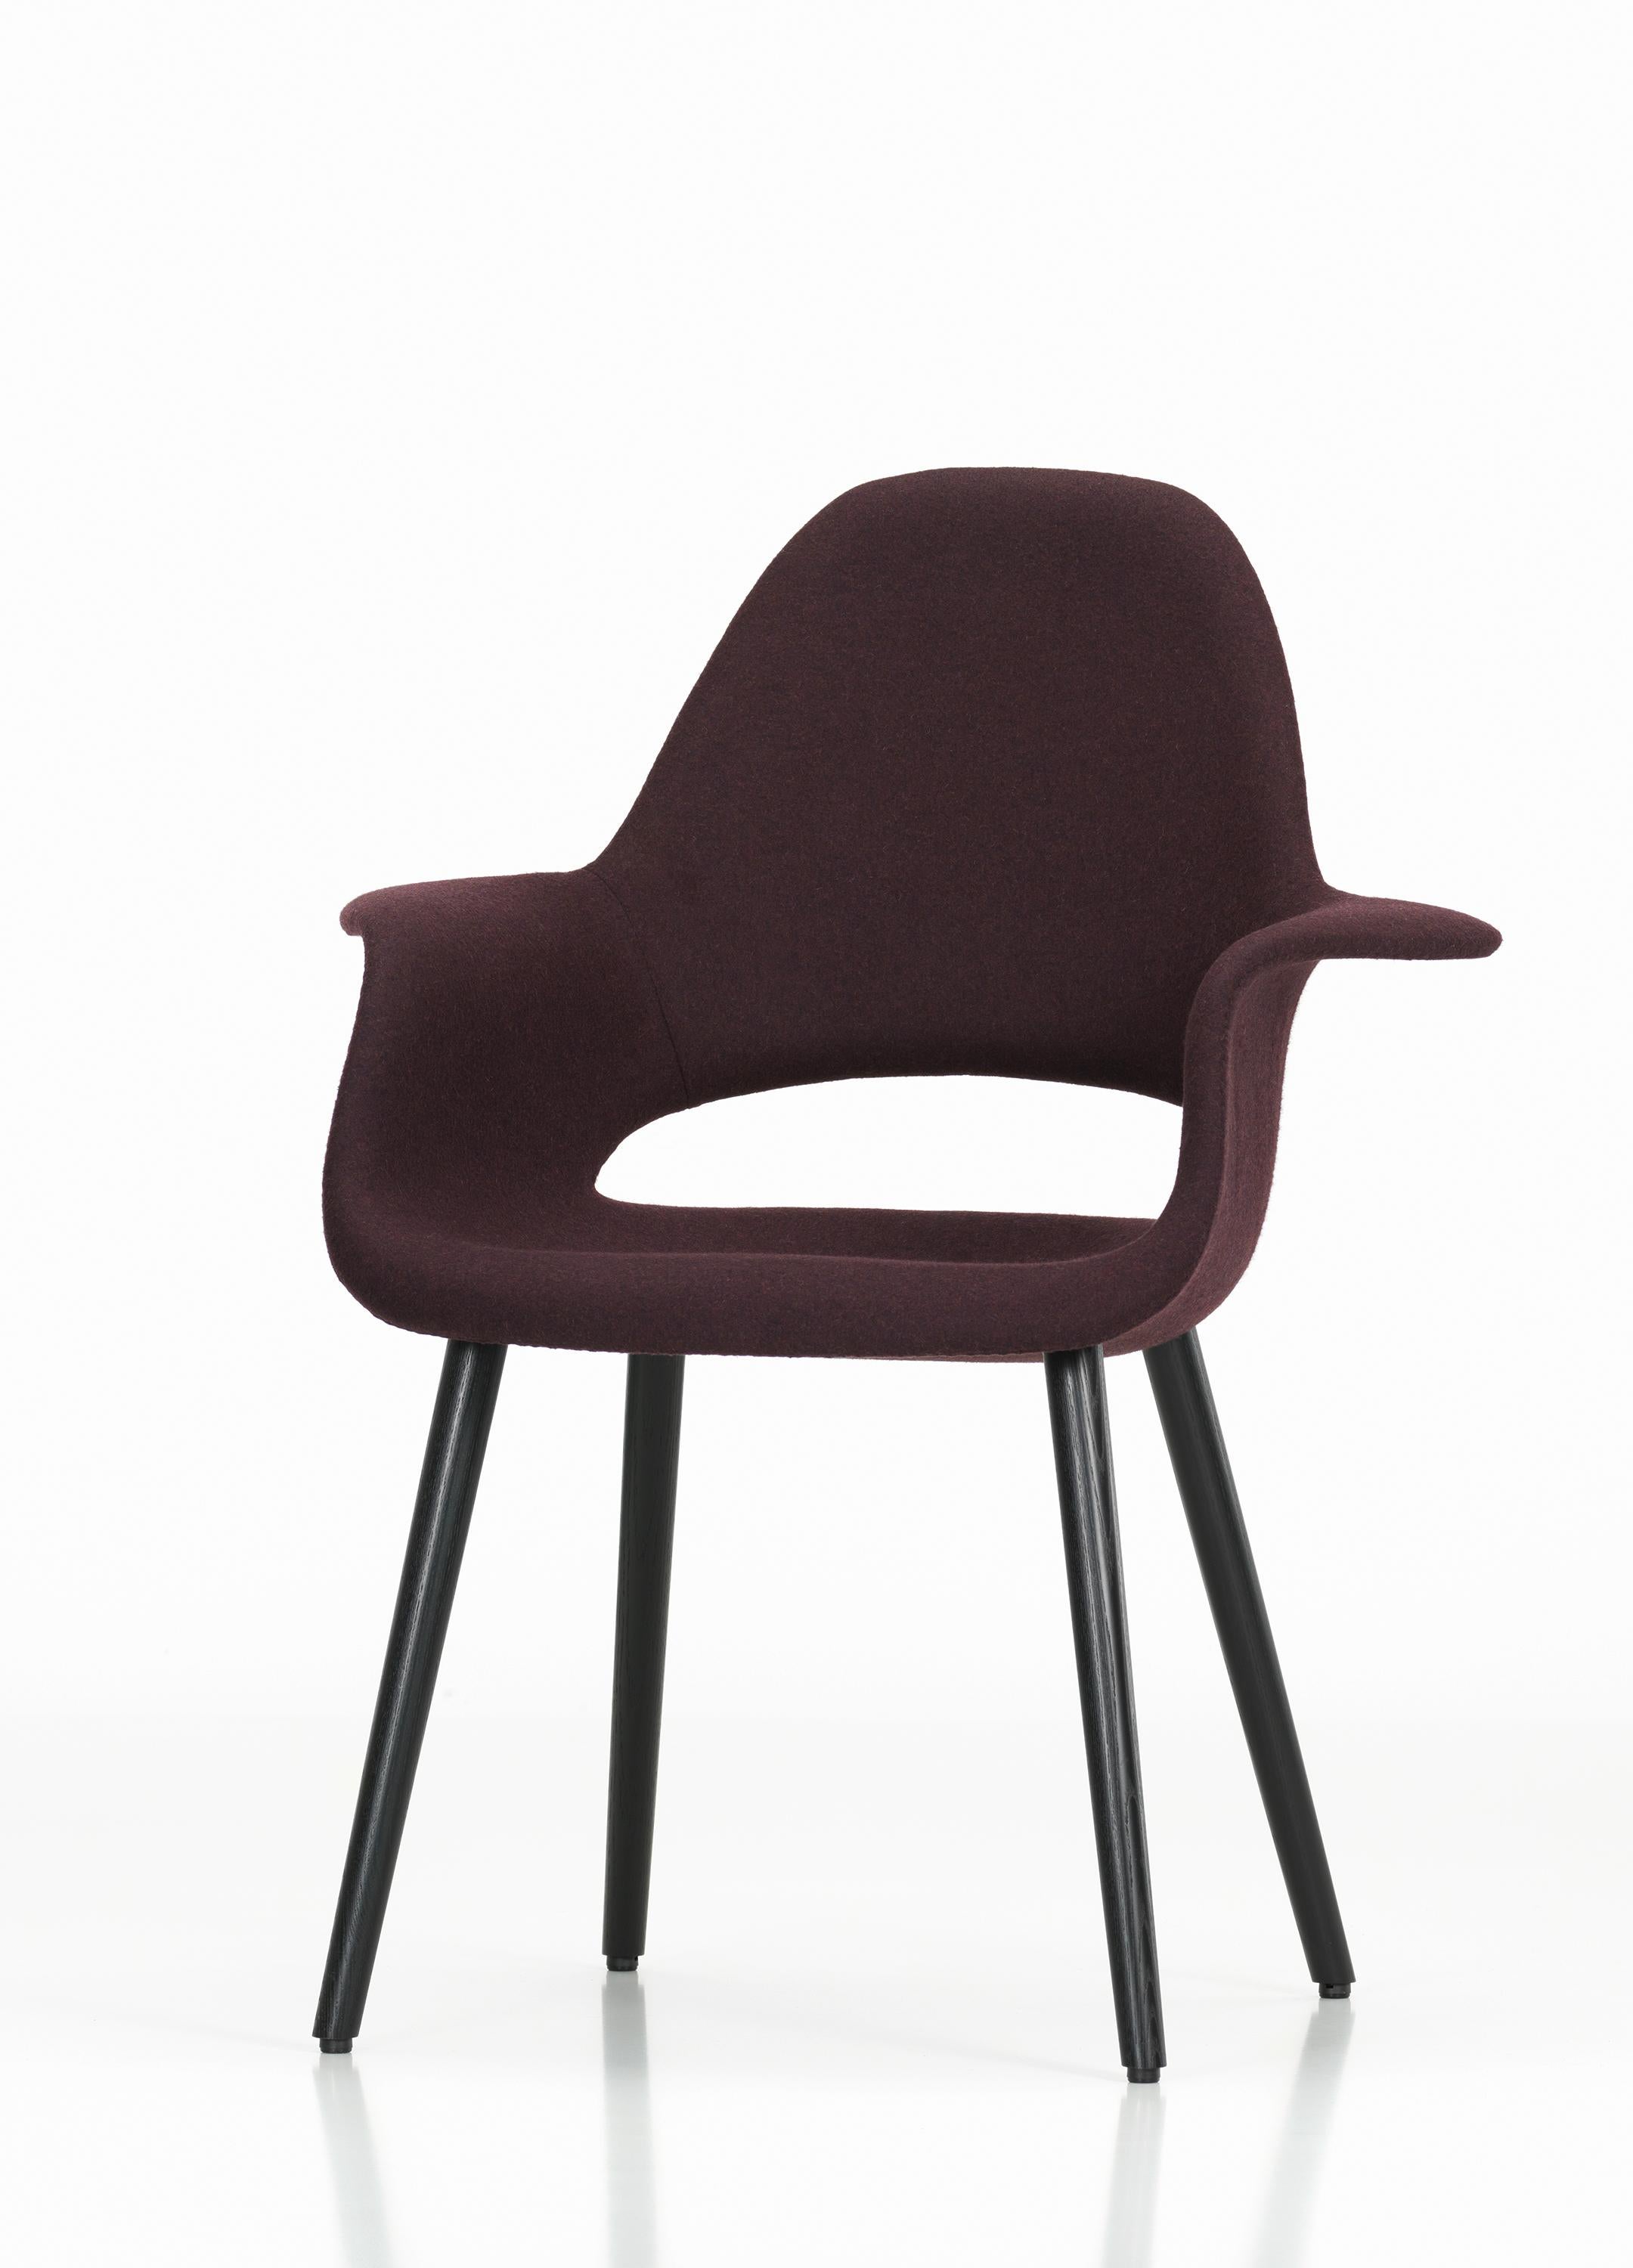 Modern Vitra Organic Conference Chair in Chestnut by Charles Eames & Eero Saarinen For Sale